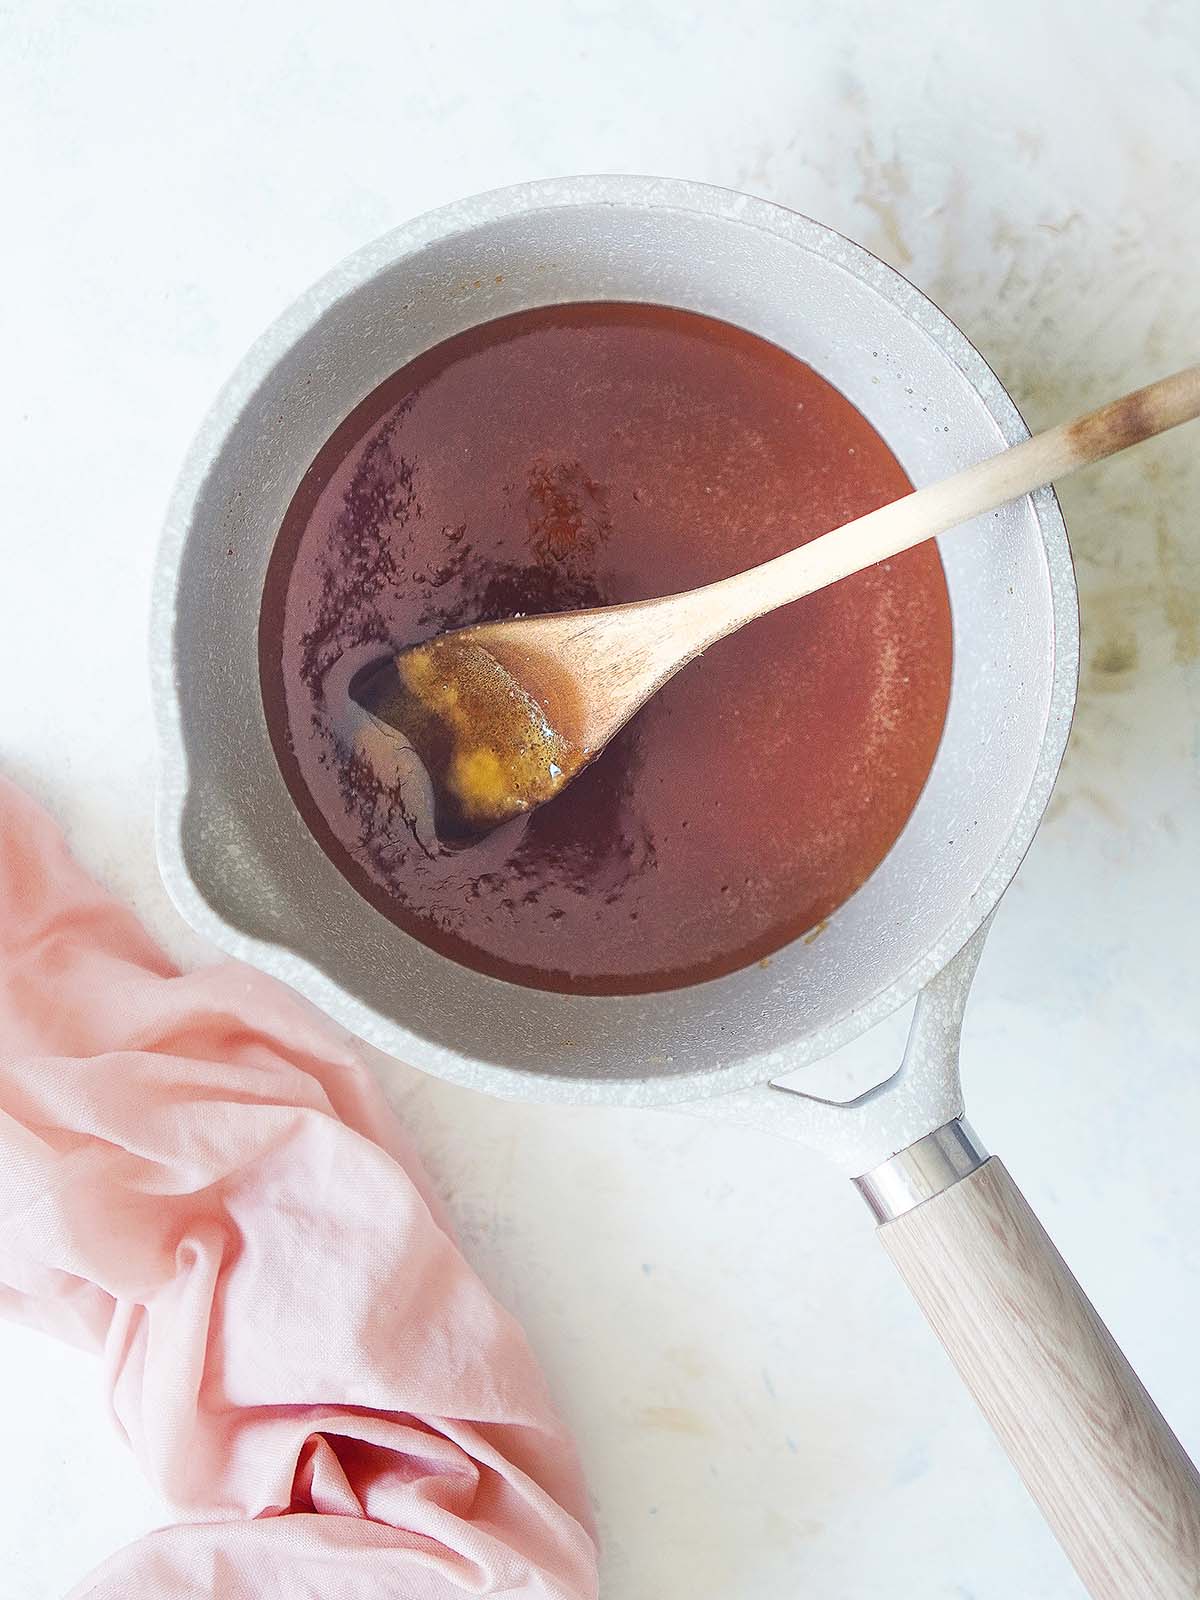 Caramel sauce in a sauce pot with a wooden spoon.